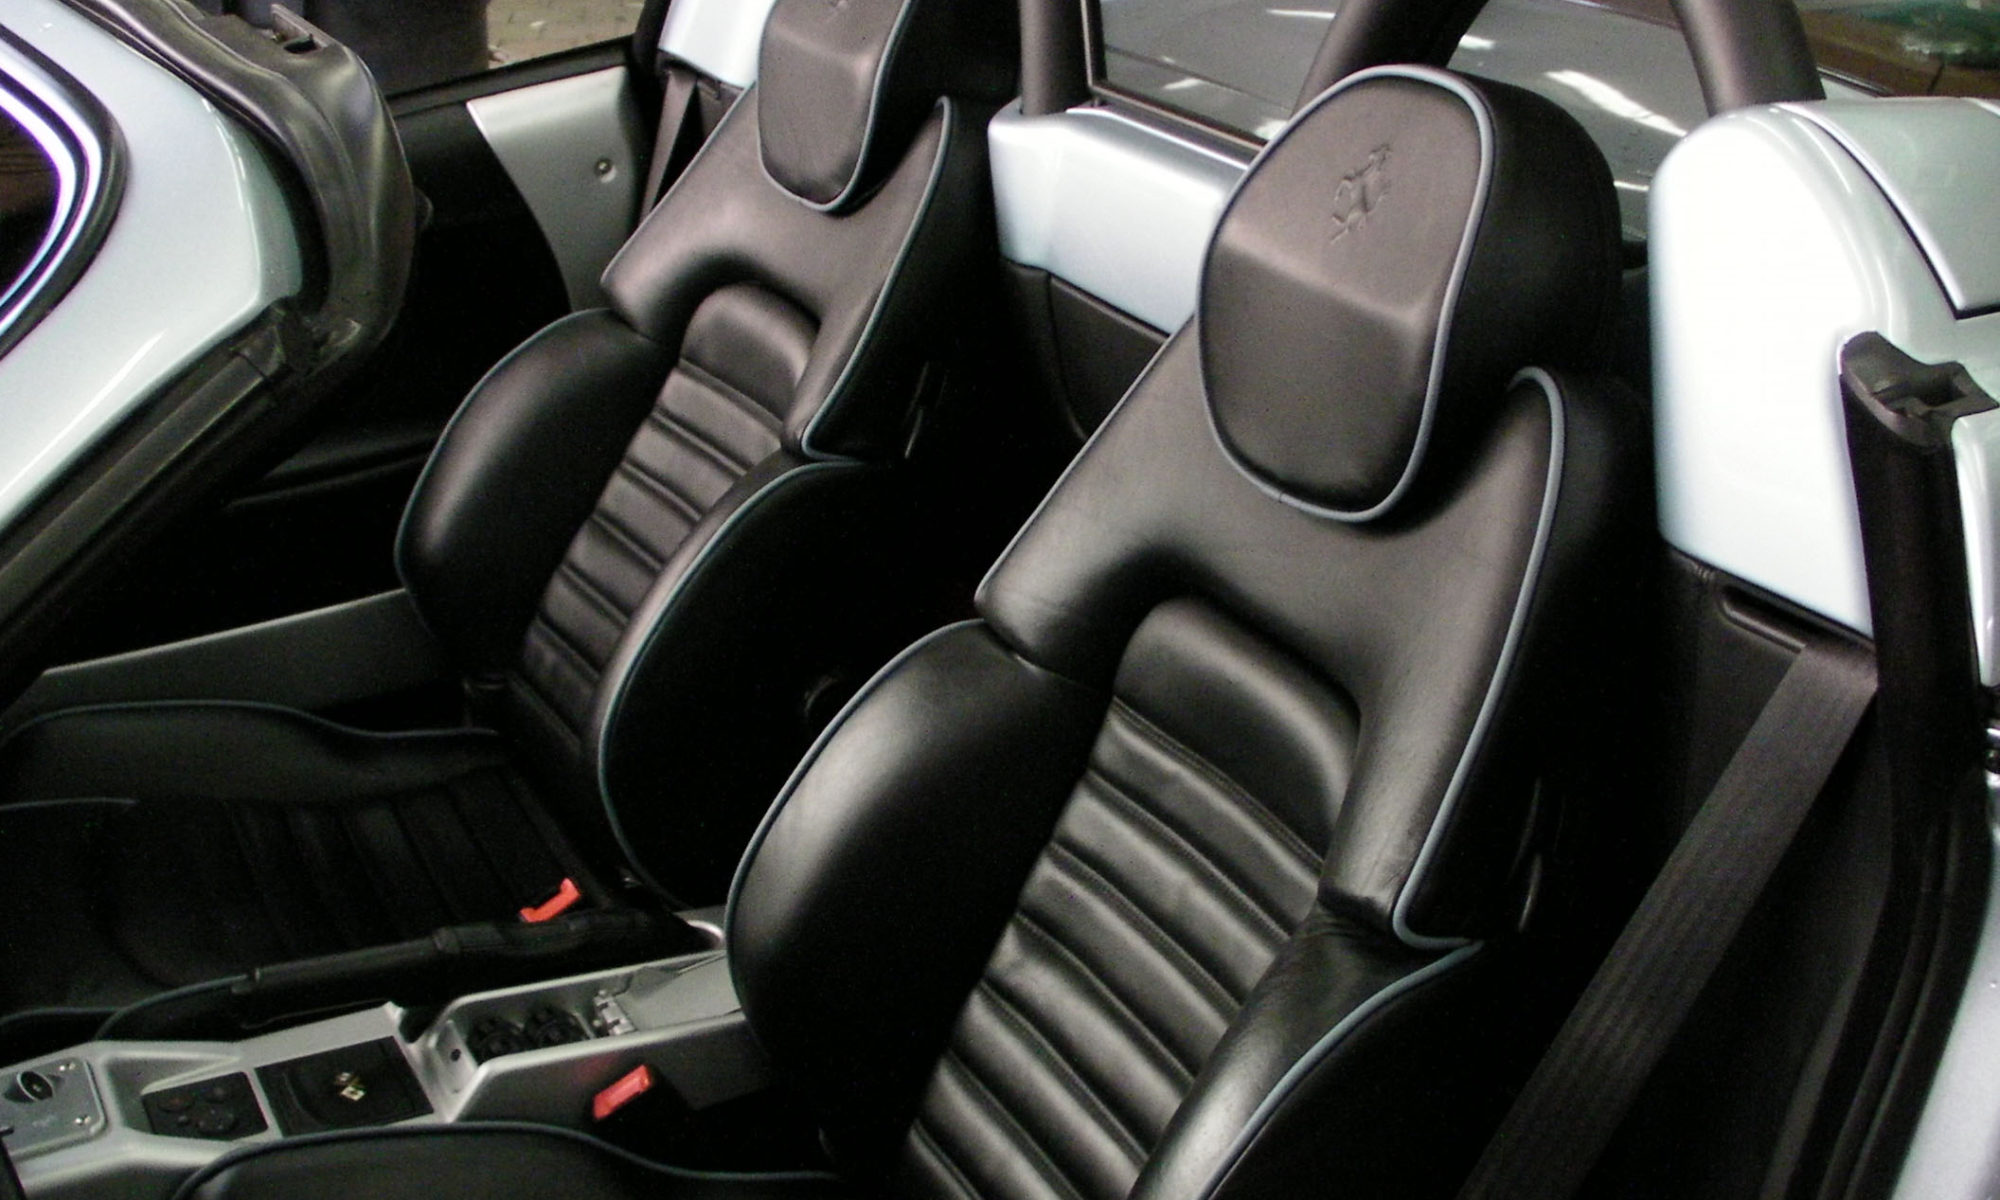 Ferrari F360. Services: Seats and headrests with contrast piping.